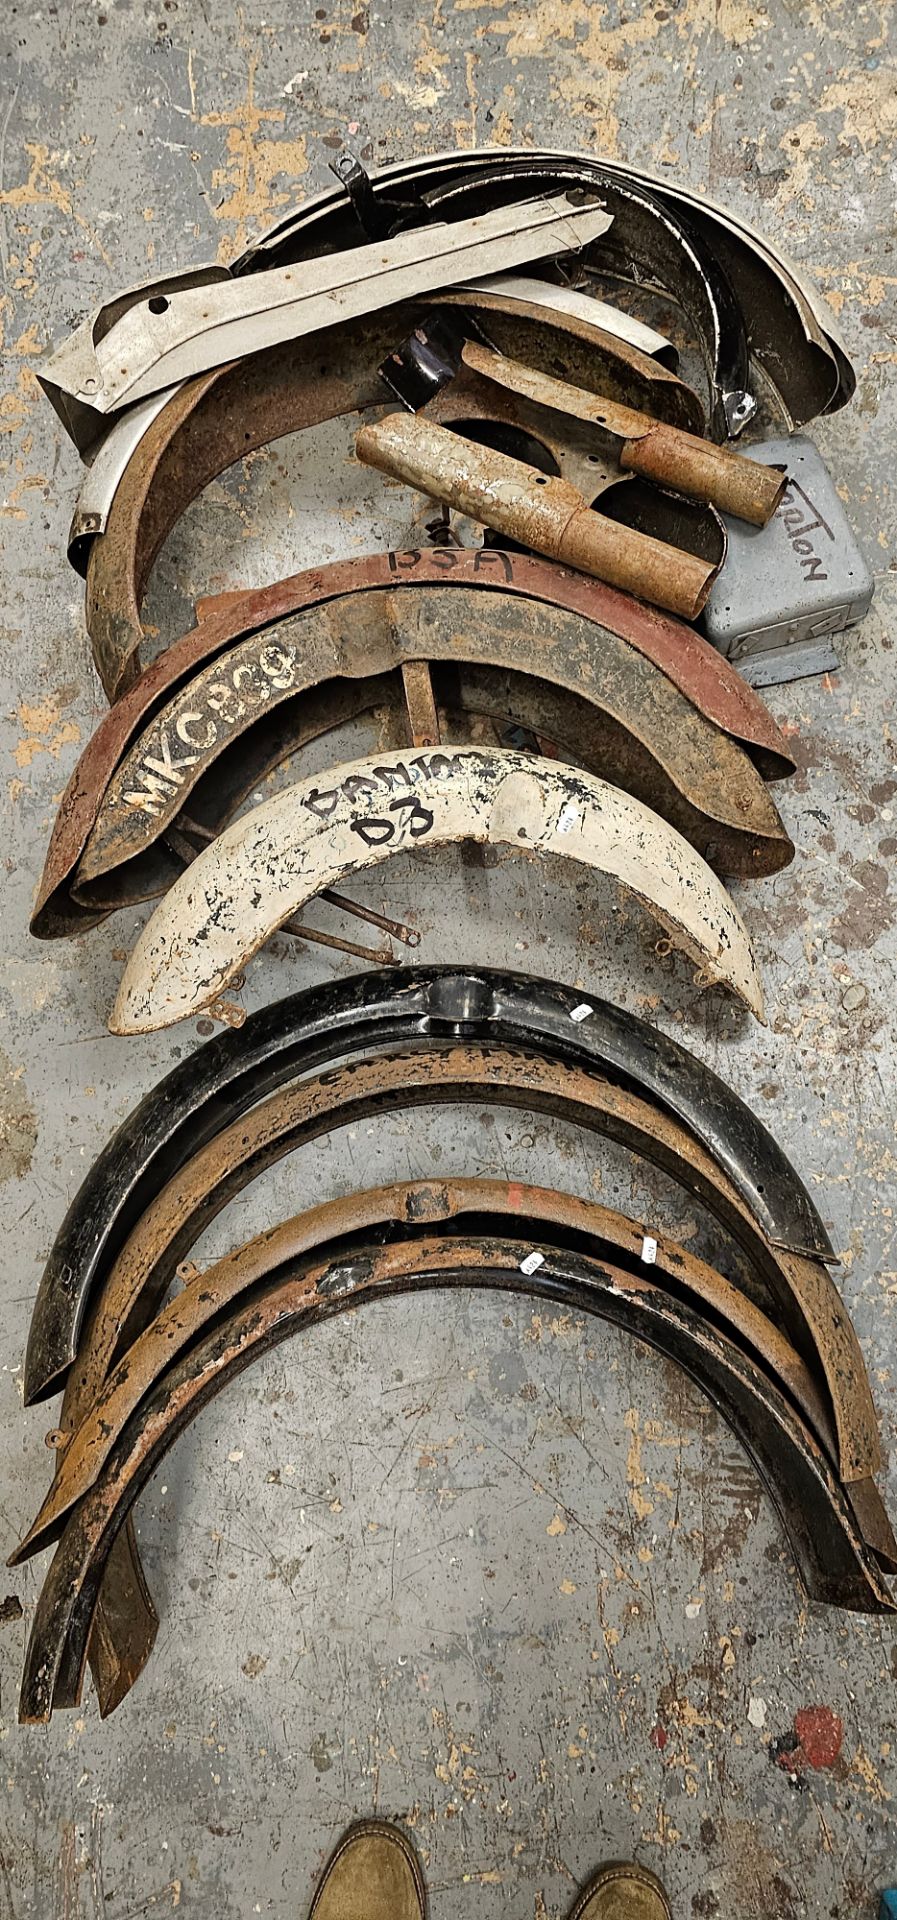 A collection of vintage British motorcycle mudguards.